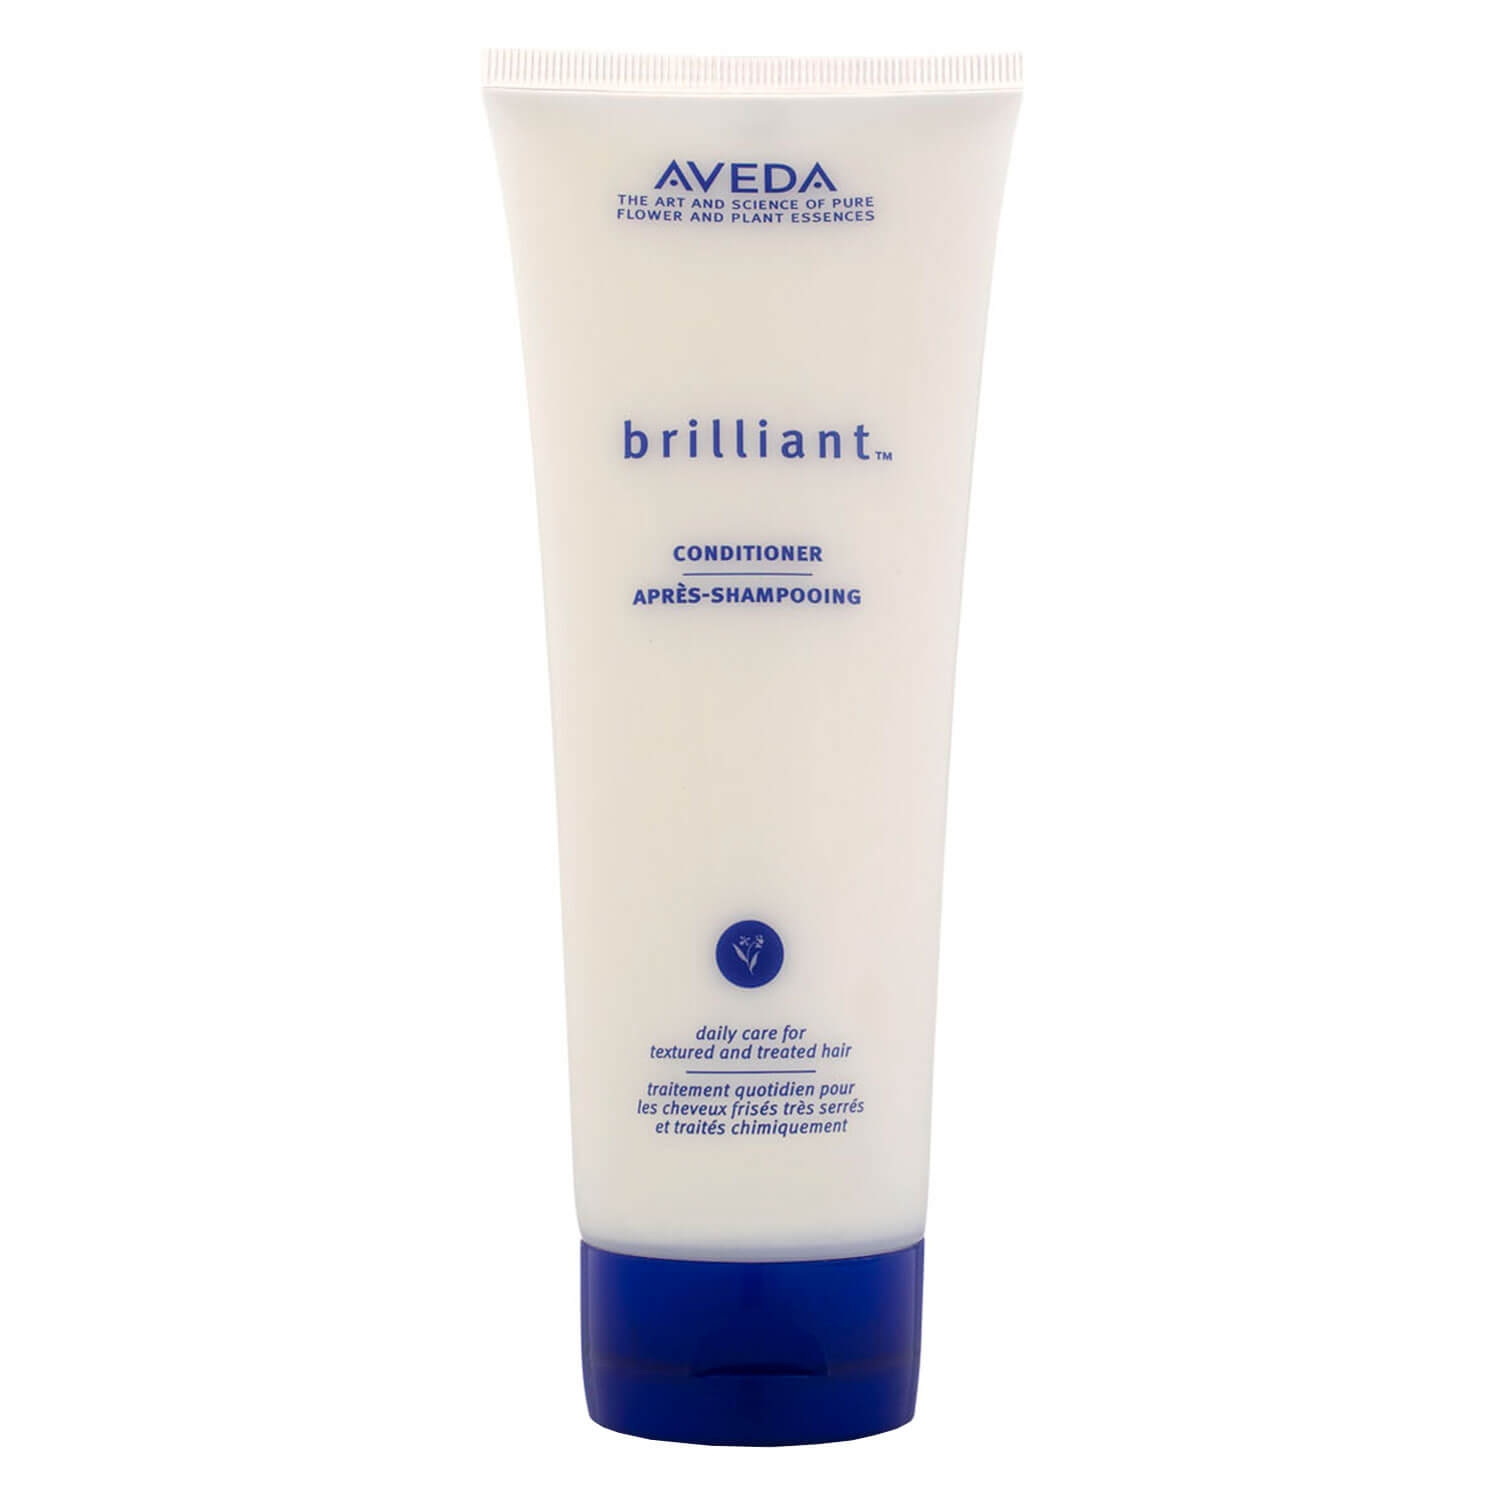 Product image from brilliant - conditioner